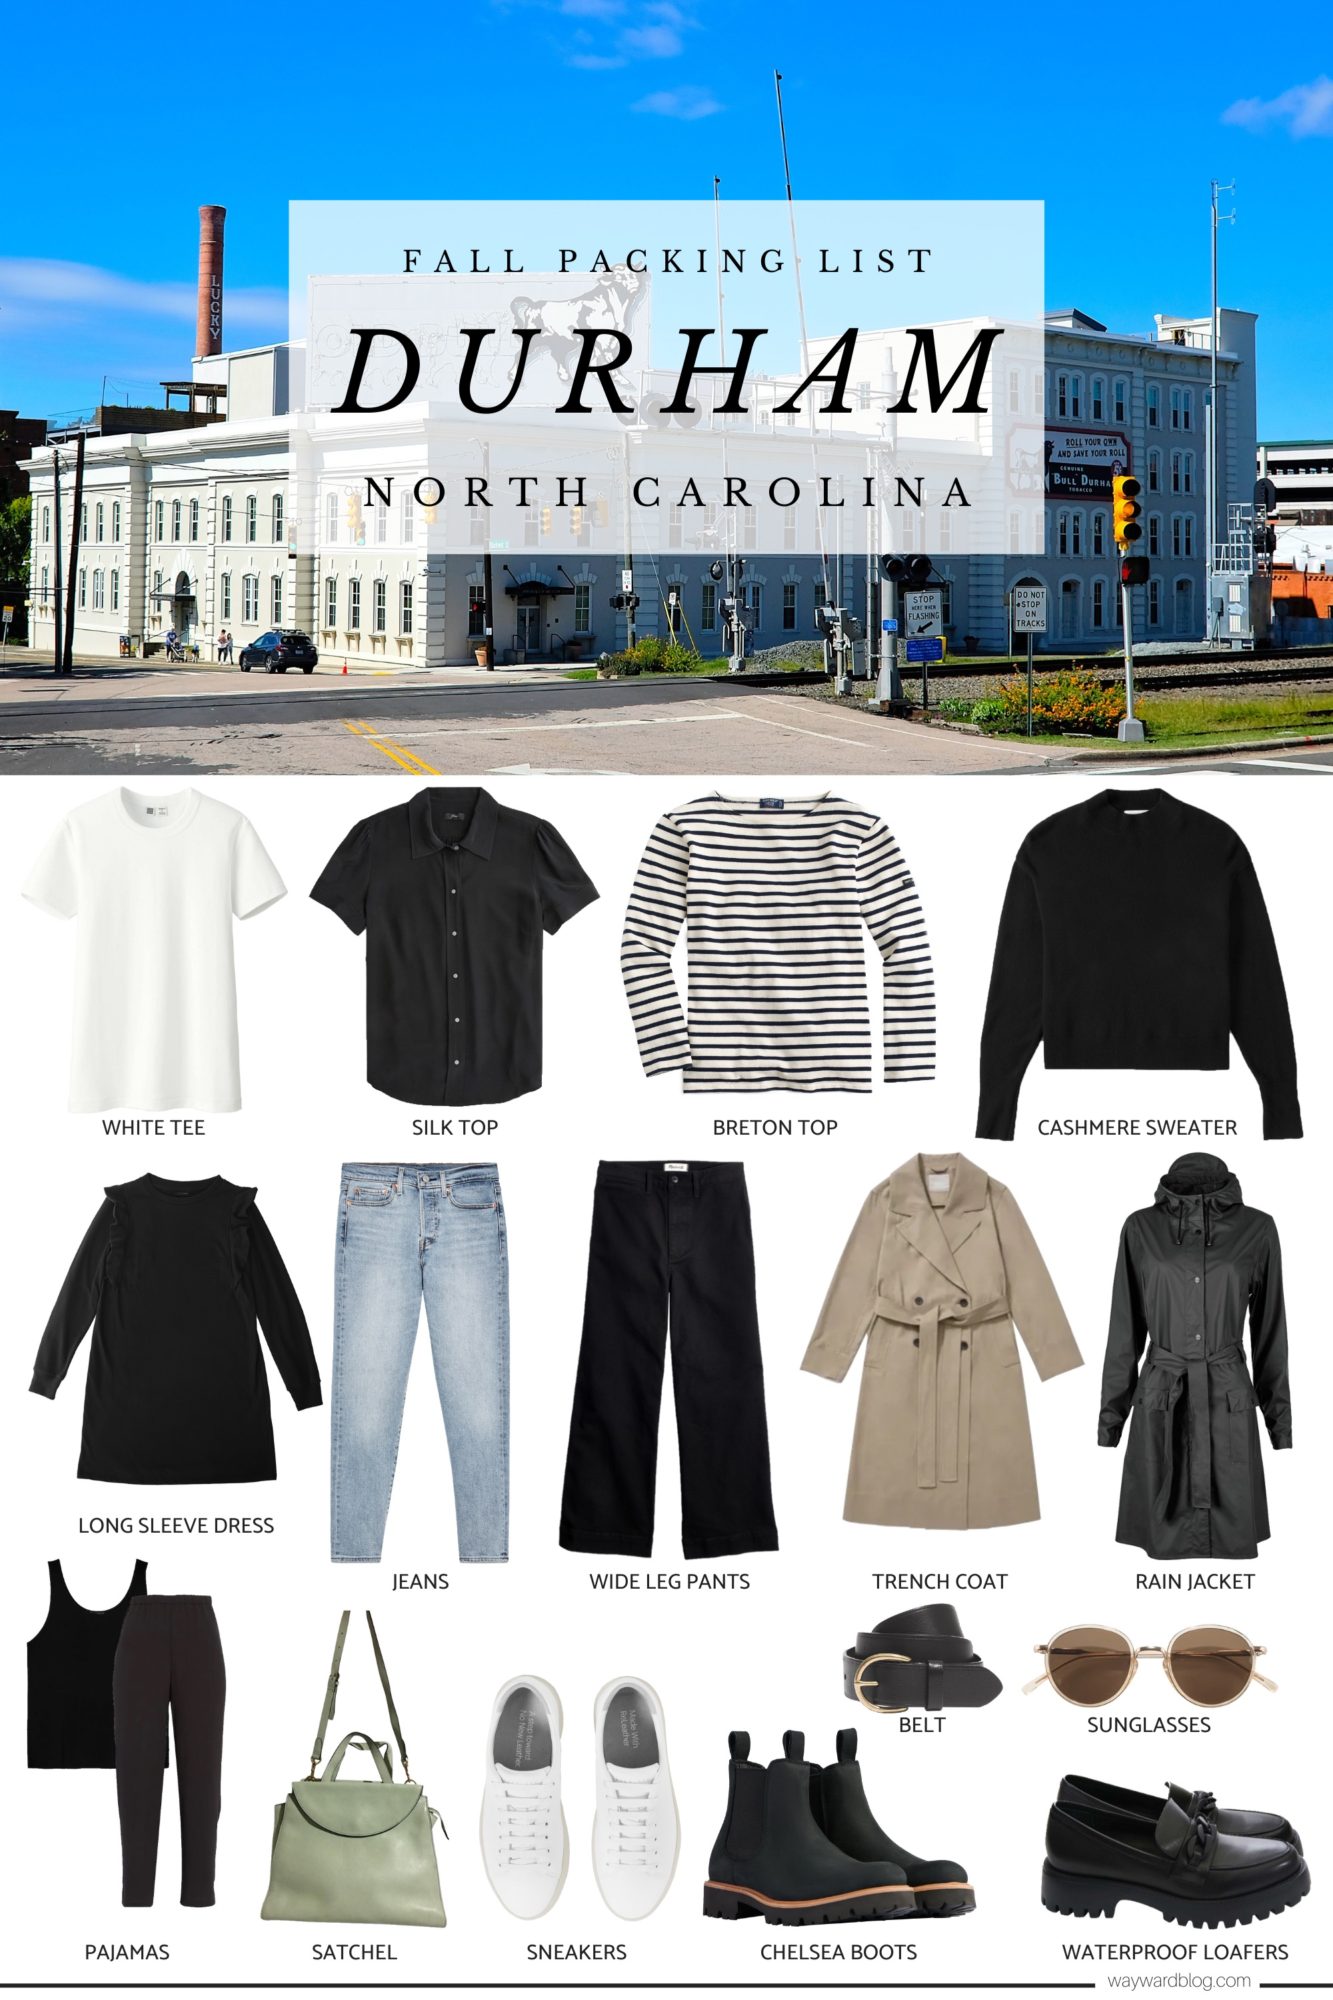 A graphic showing everything the author packed in her suitcase for Durham, North Carolina